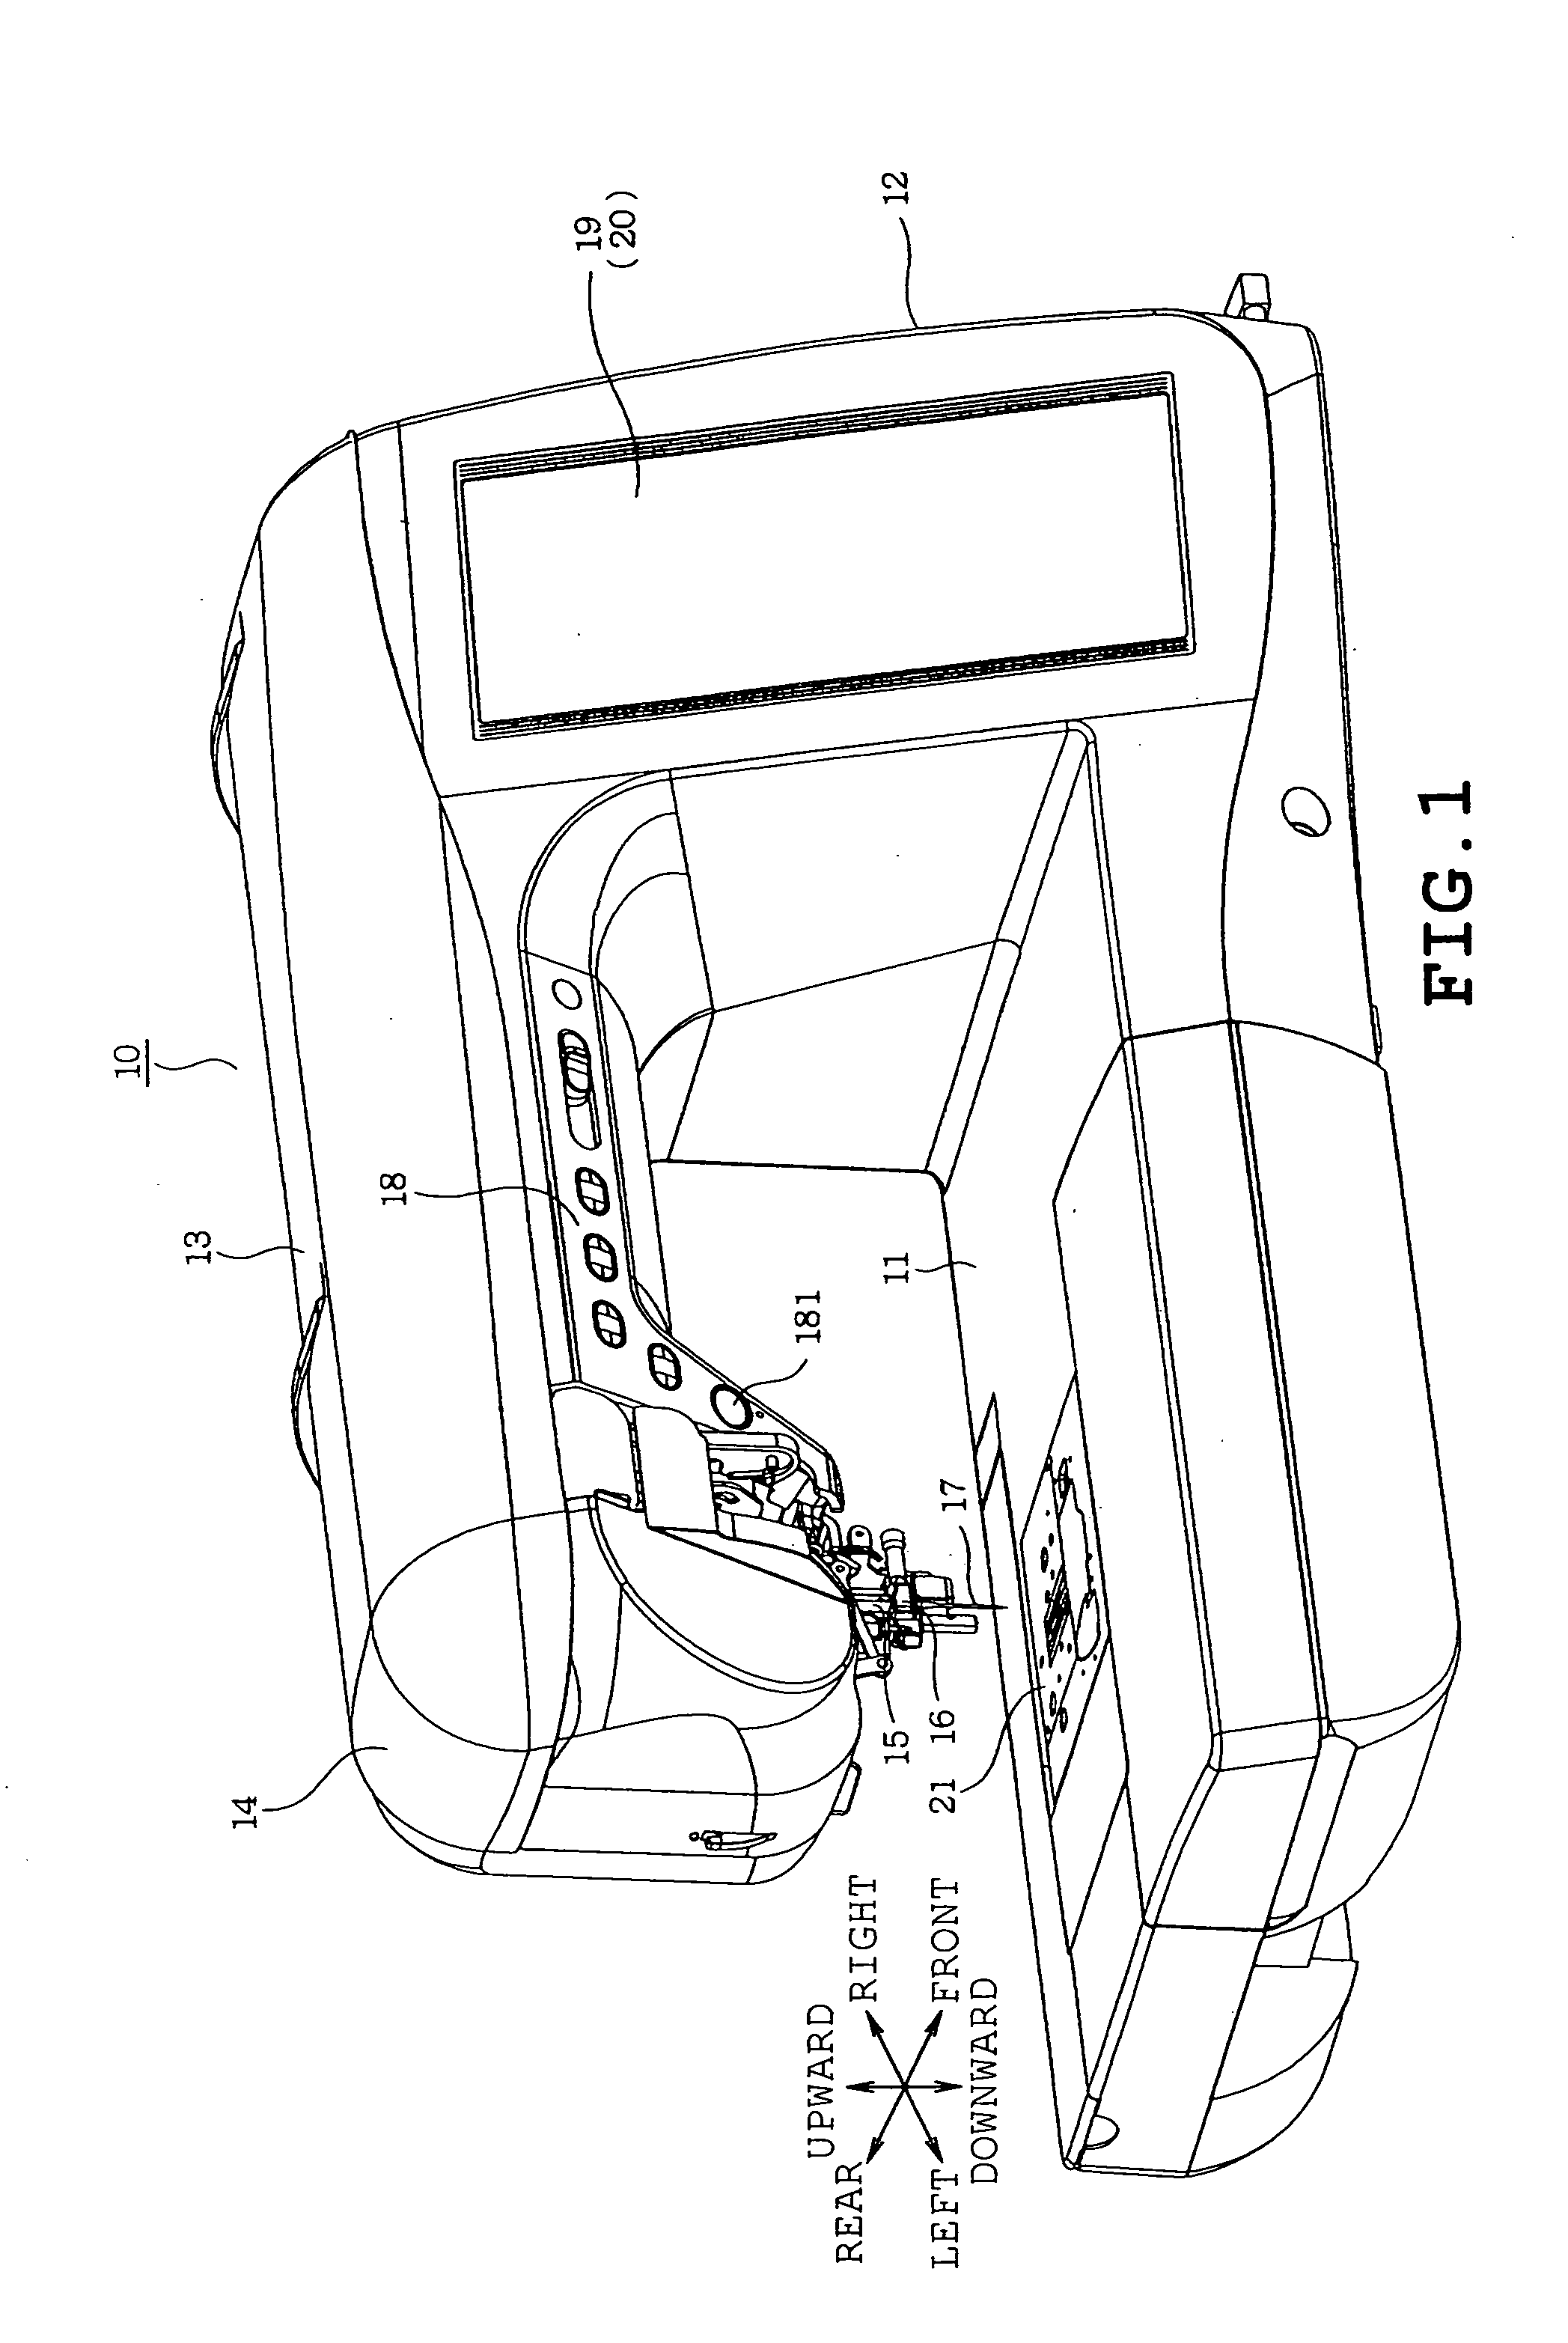 Sewing machine with detachable needle plate